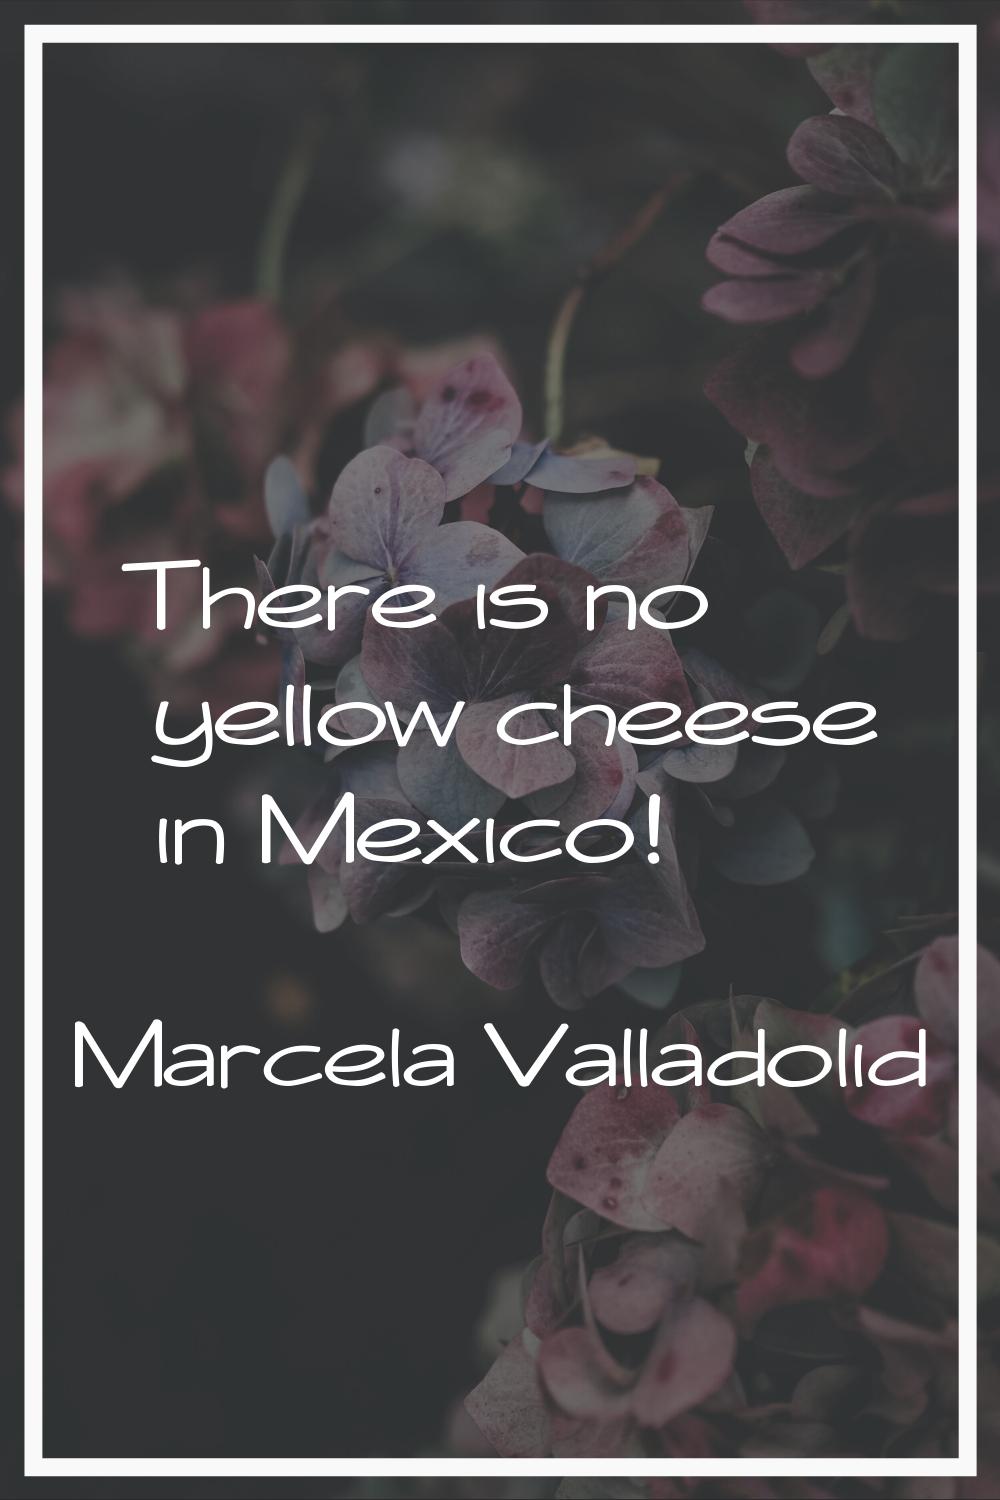 There is no yellow cheese in Mexico!